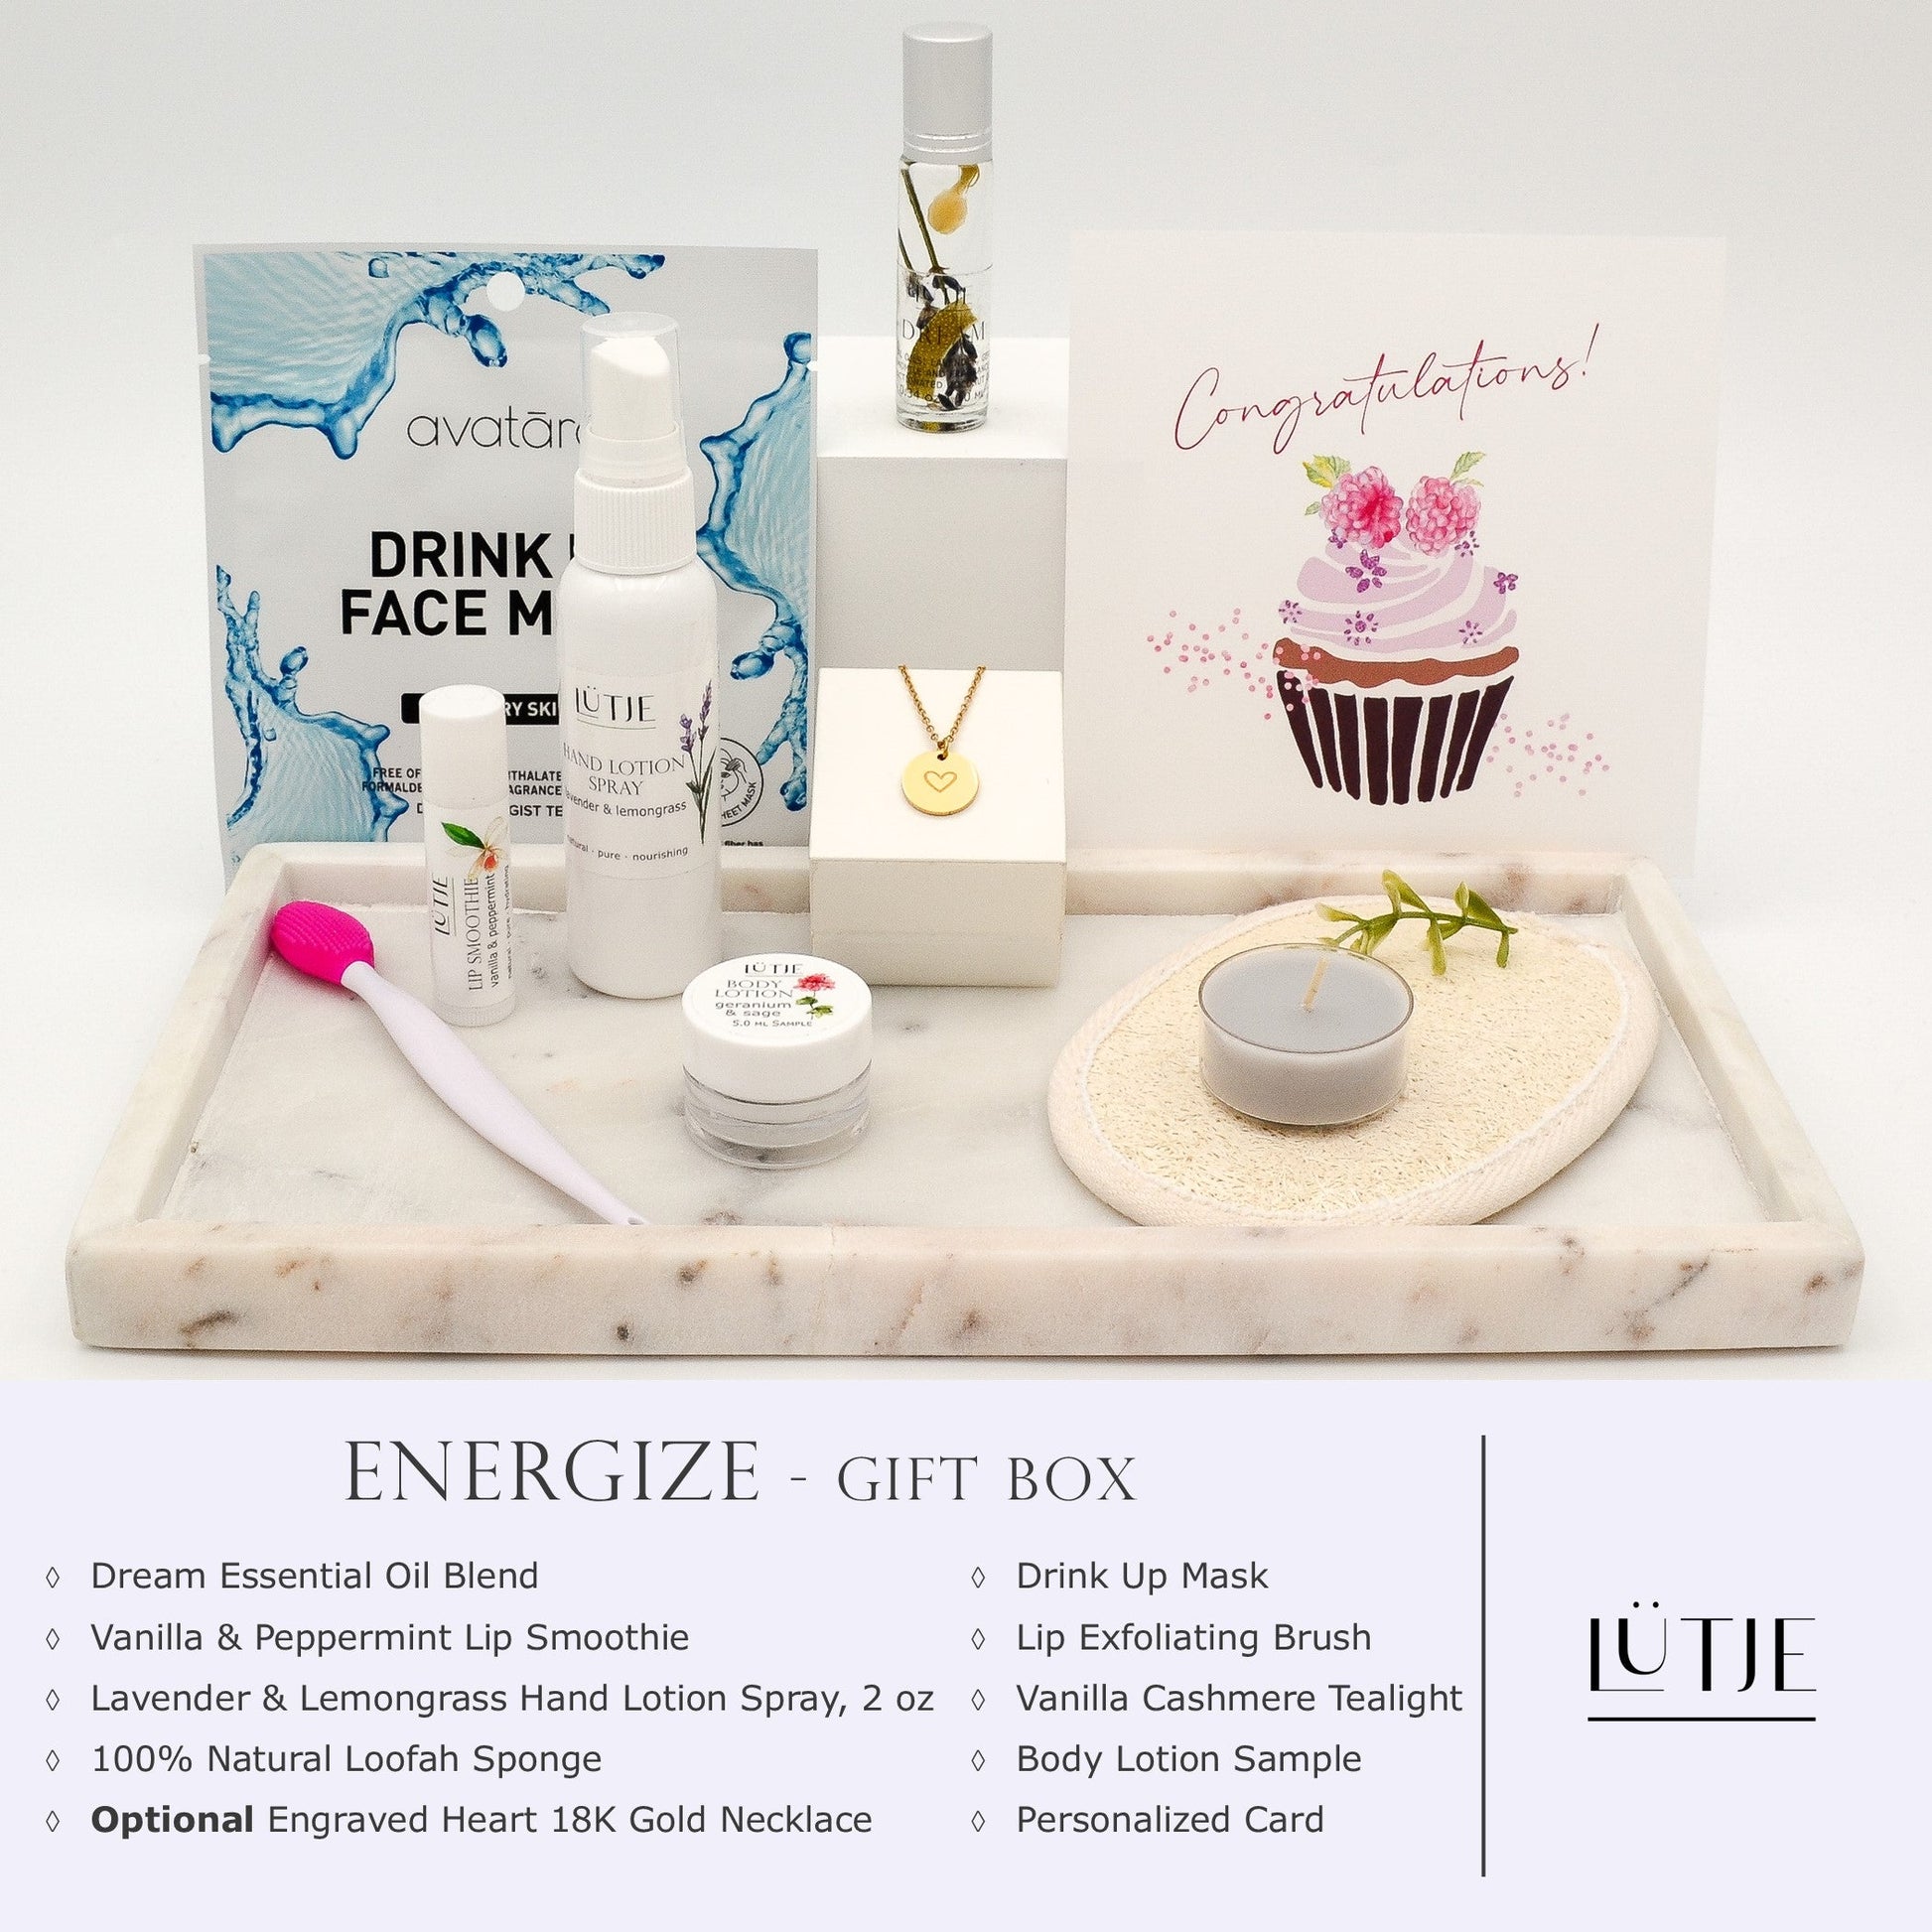 Energize Gift Box for women, BFF, wife, daughter, sister, mom, or grandma, includes Lavender & Lemongrass hand lotion spray, essential oil, lip balm, hydrating face mask, other bath, spa and self-care items, and optional 18K gold-plated necklace with engraved heart.